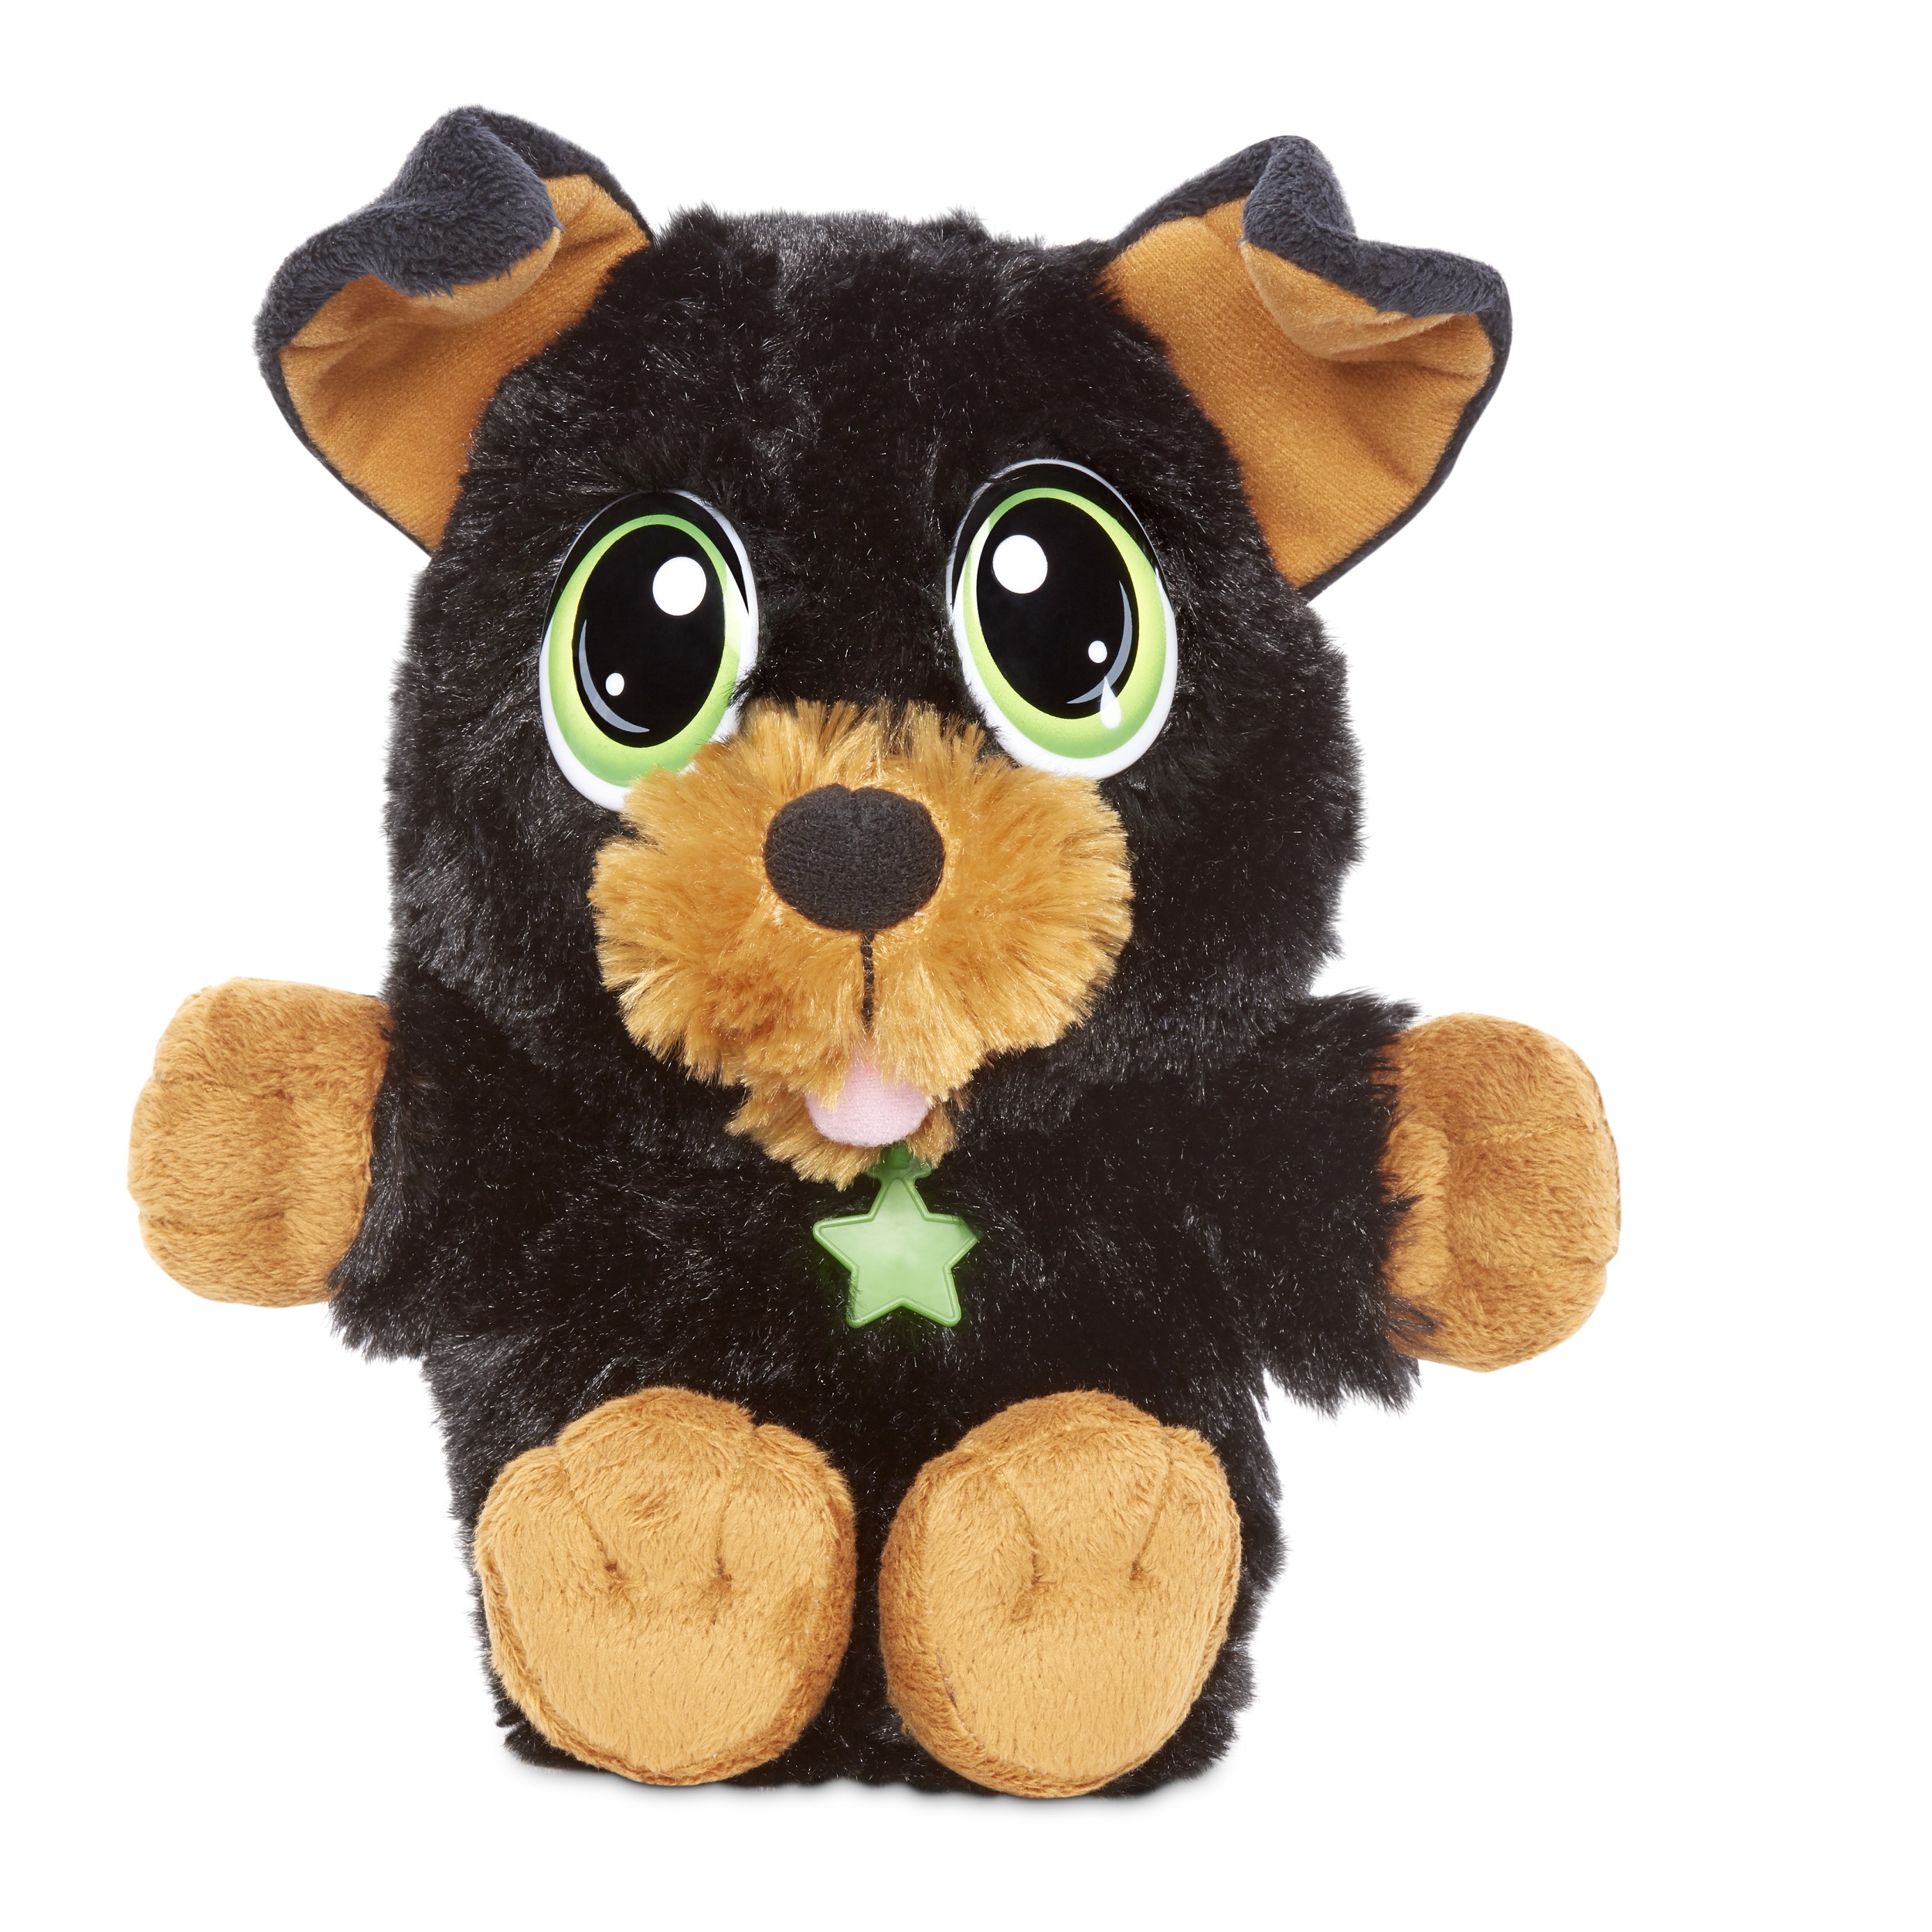 Rescue Tales Cuddly Pup Yorkie Soft Plush Pet Toy - image 1 of 7